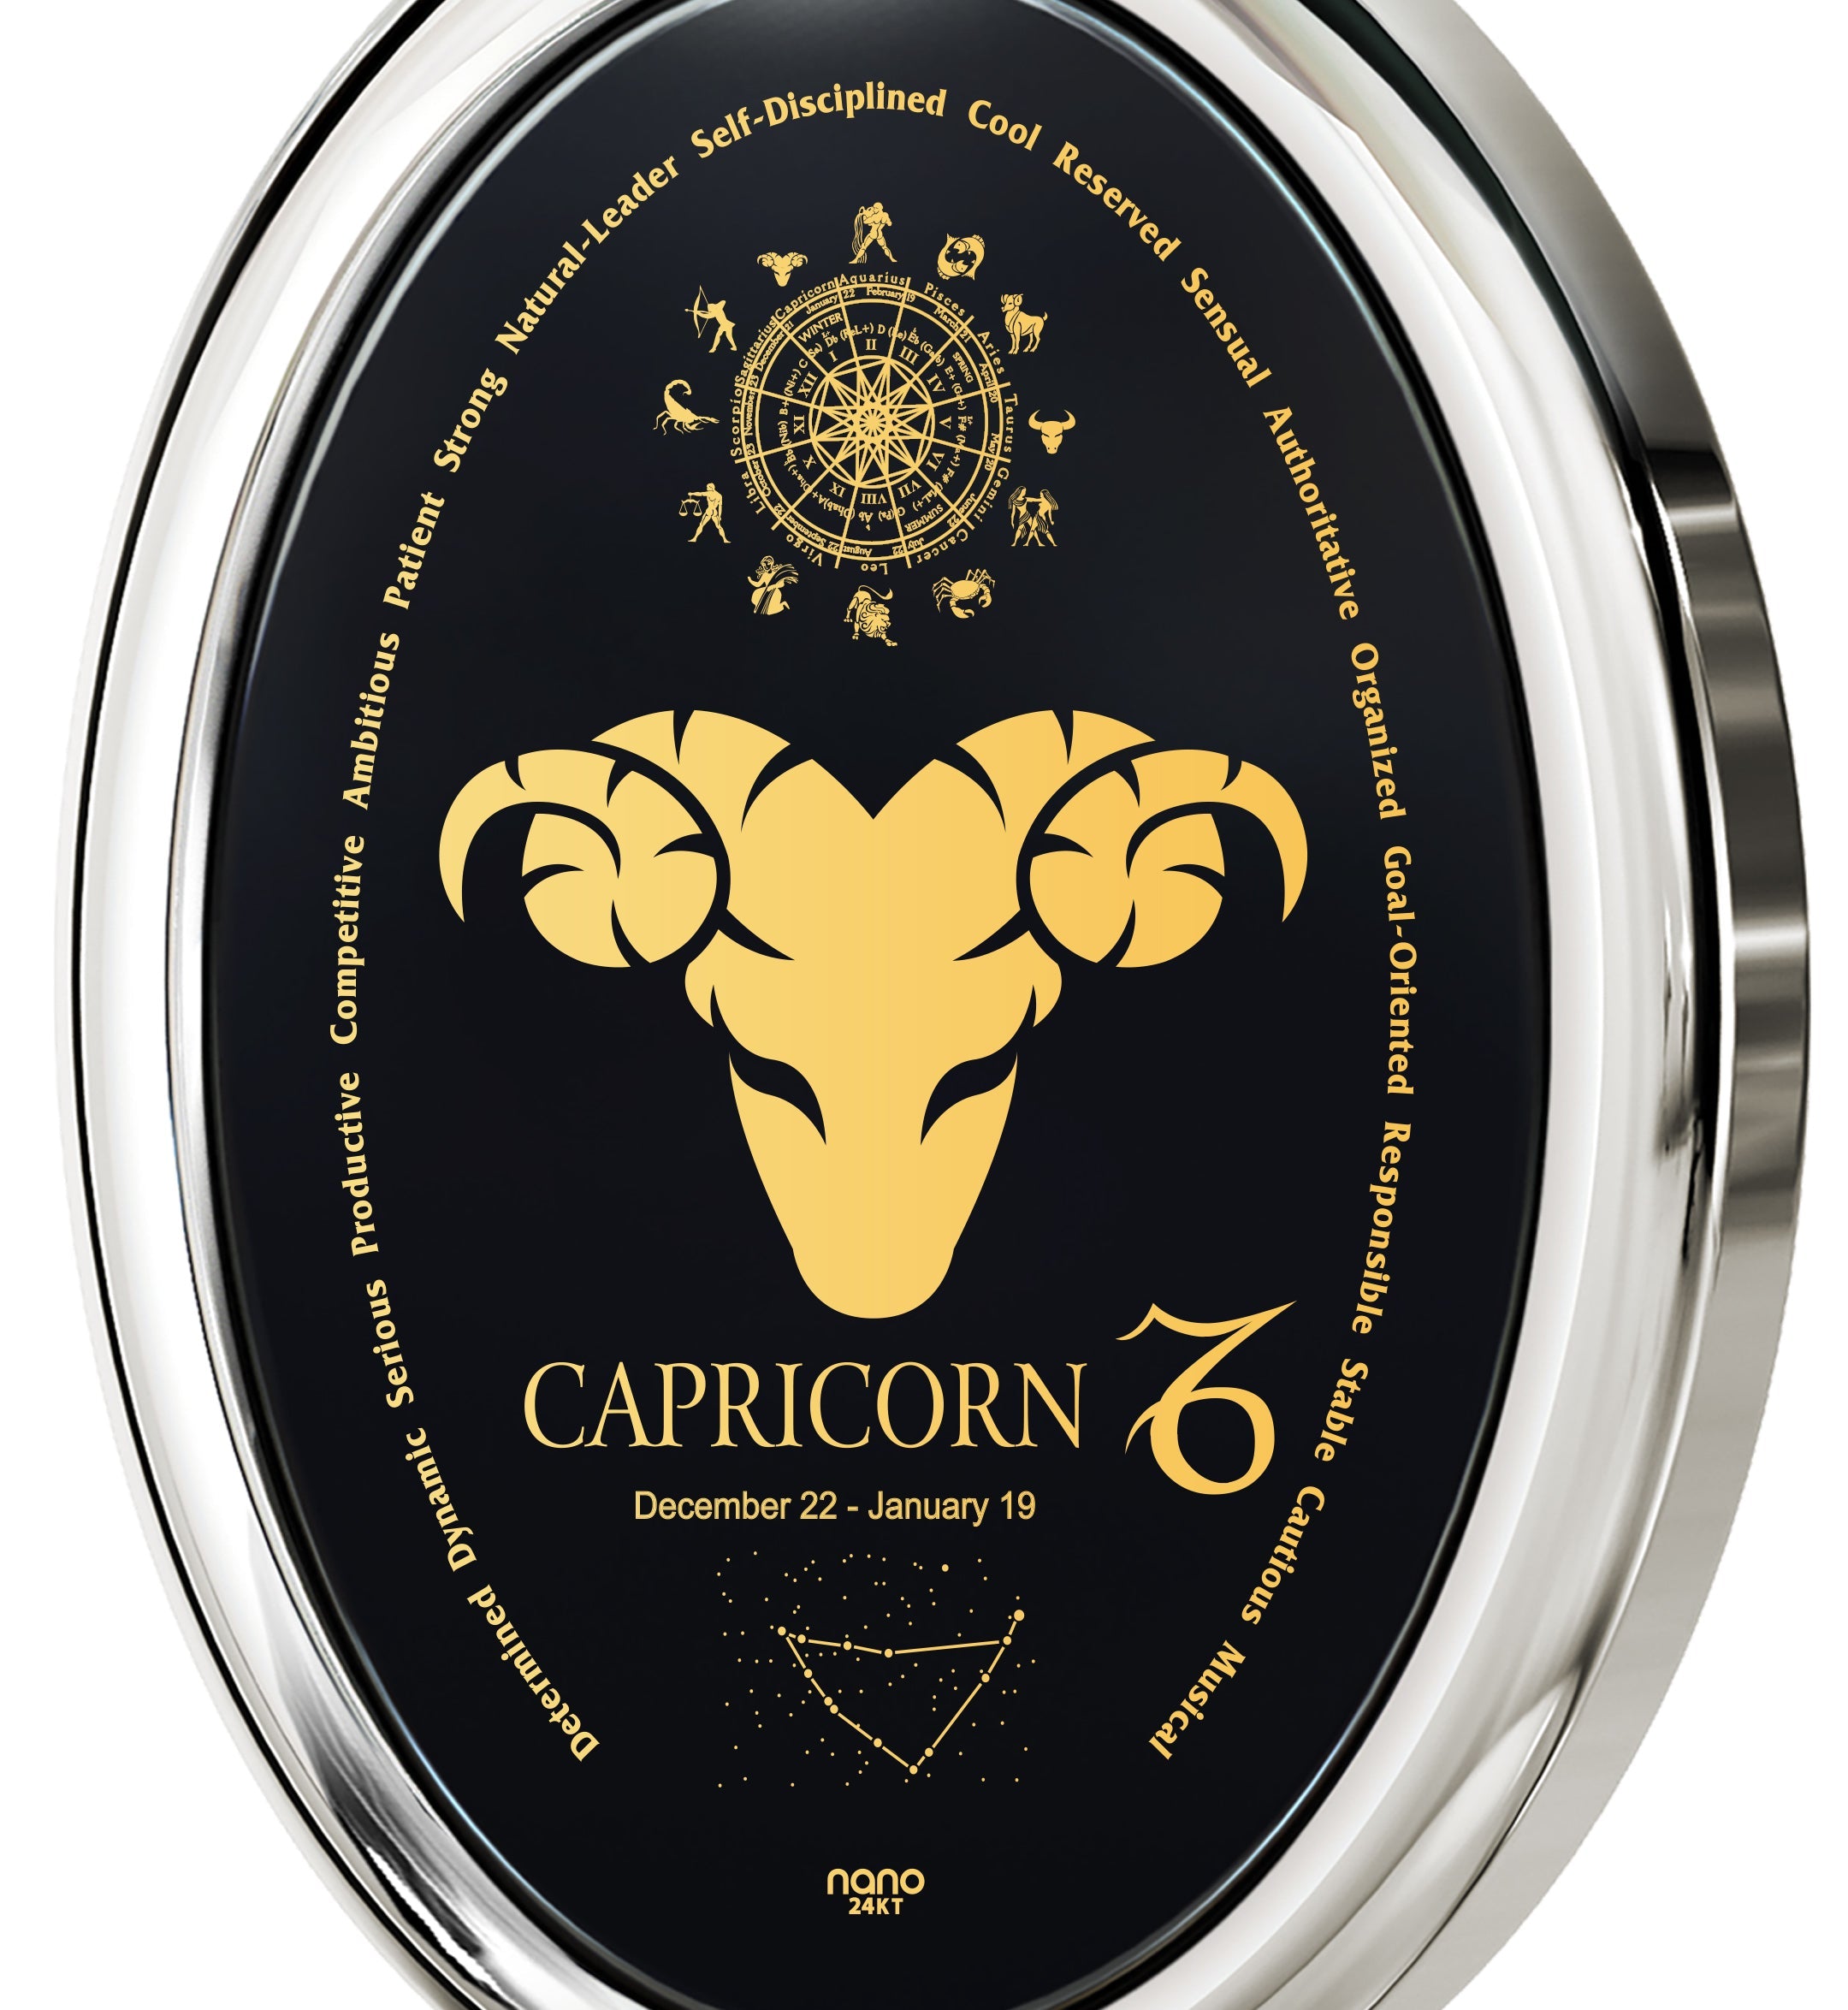 Round, gold and black Capricorn Necklace Zodiac Pendant 24k Gold Inscribed on Onyx Stone with date range and descriptive words around the perimeter.